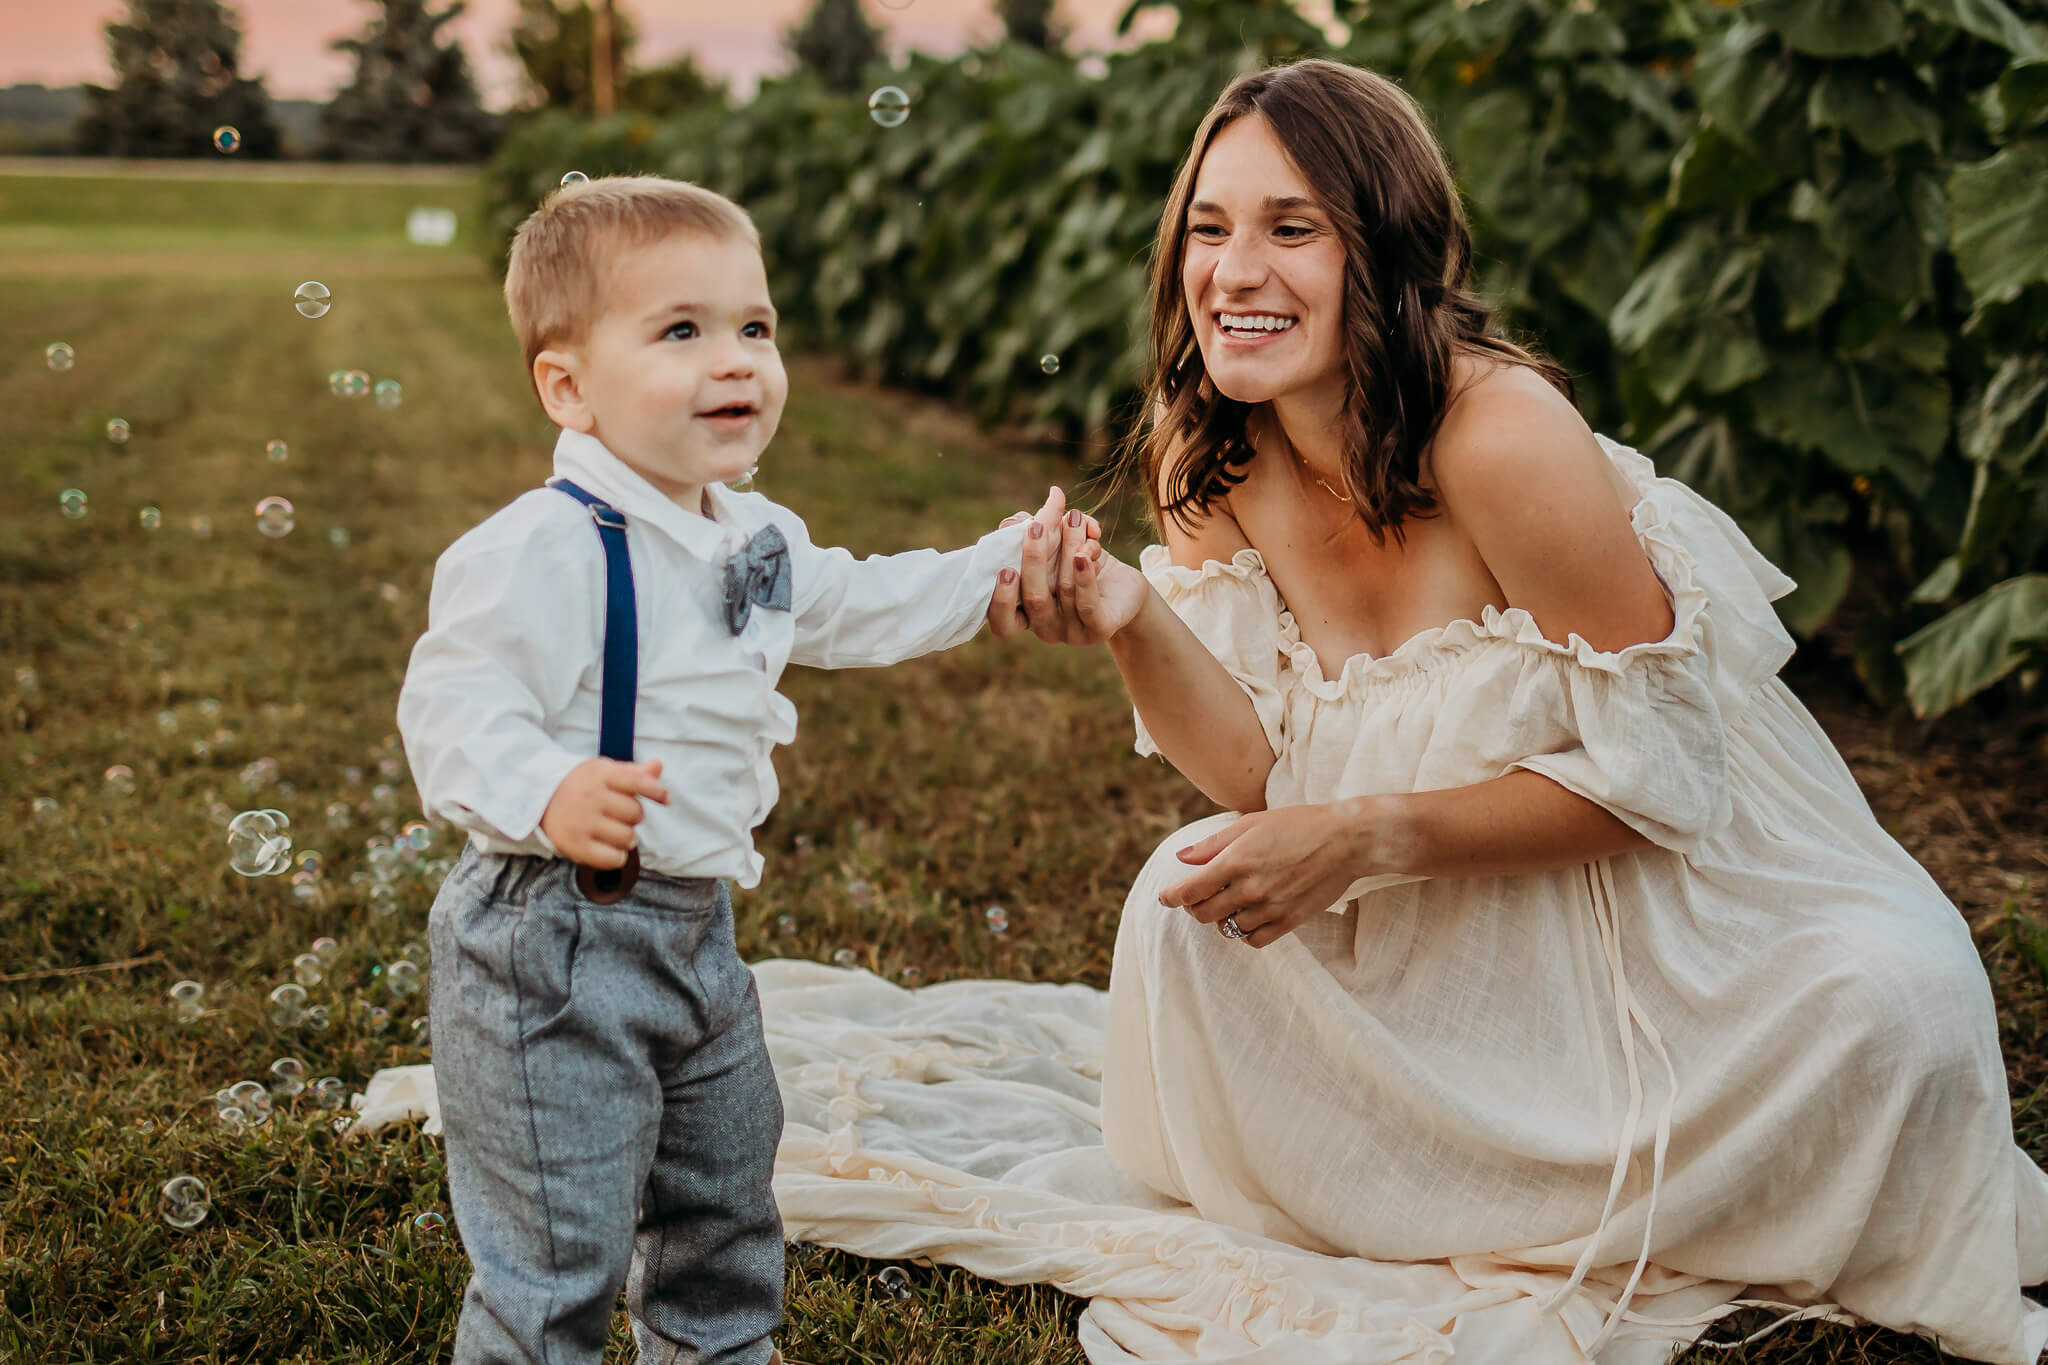 A happy mom plays with bubbles with her toddler son in suspenders and bowtie in a park at sunset thanks to acupuncture eau claire